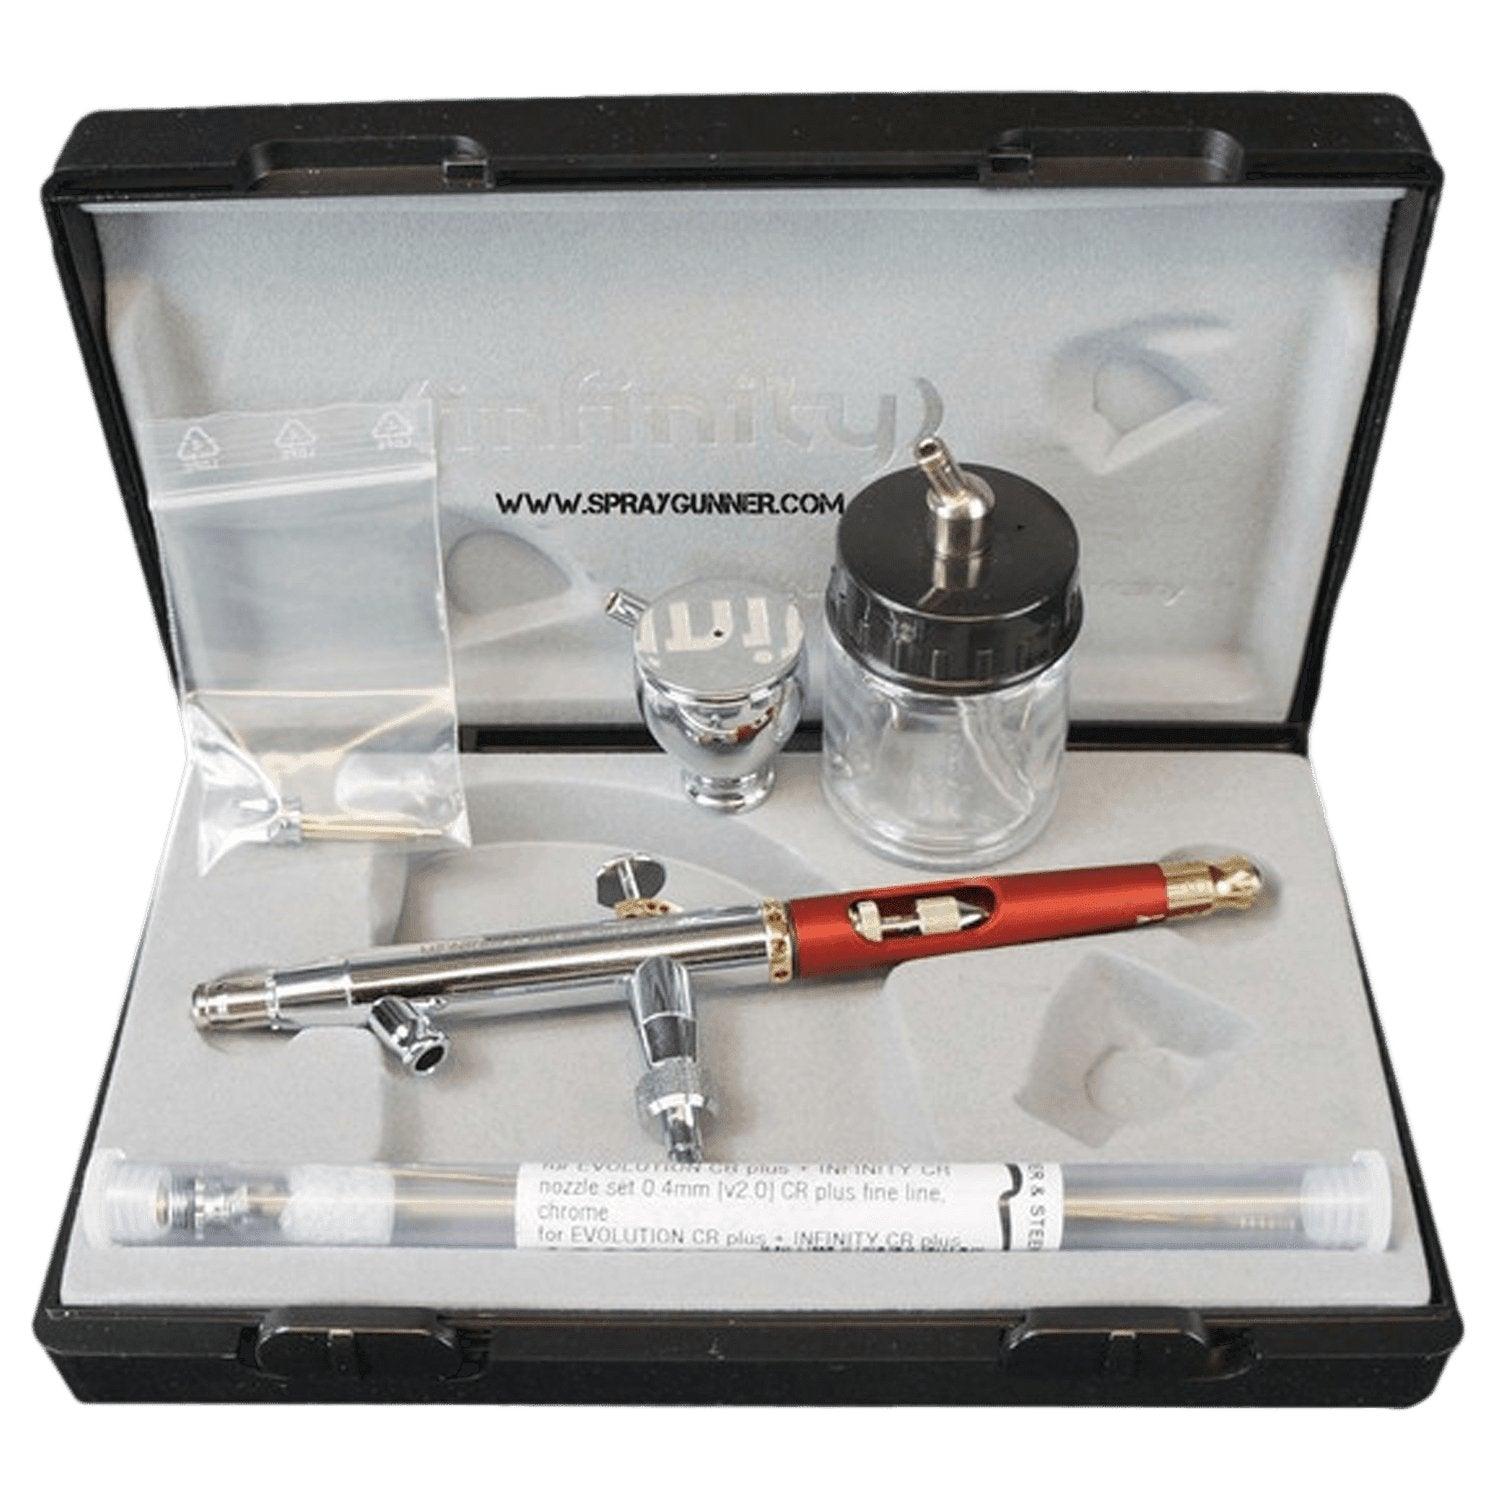 Harder & Steenbeck Infinity X CR Plus 2 in 1 Airbrush Set (Double Action) - Matuska Taxidermy Supply Company